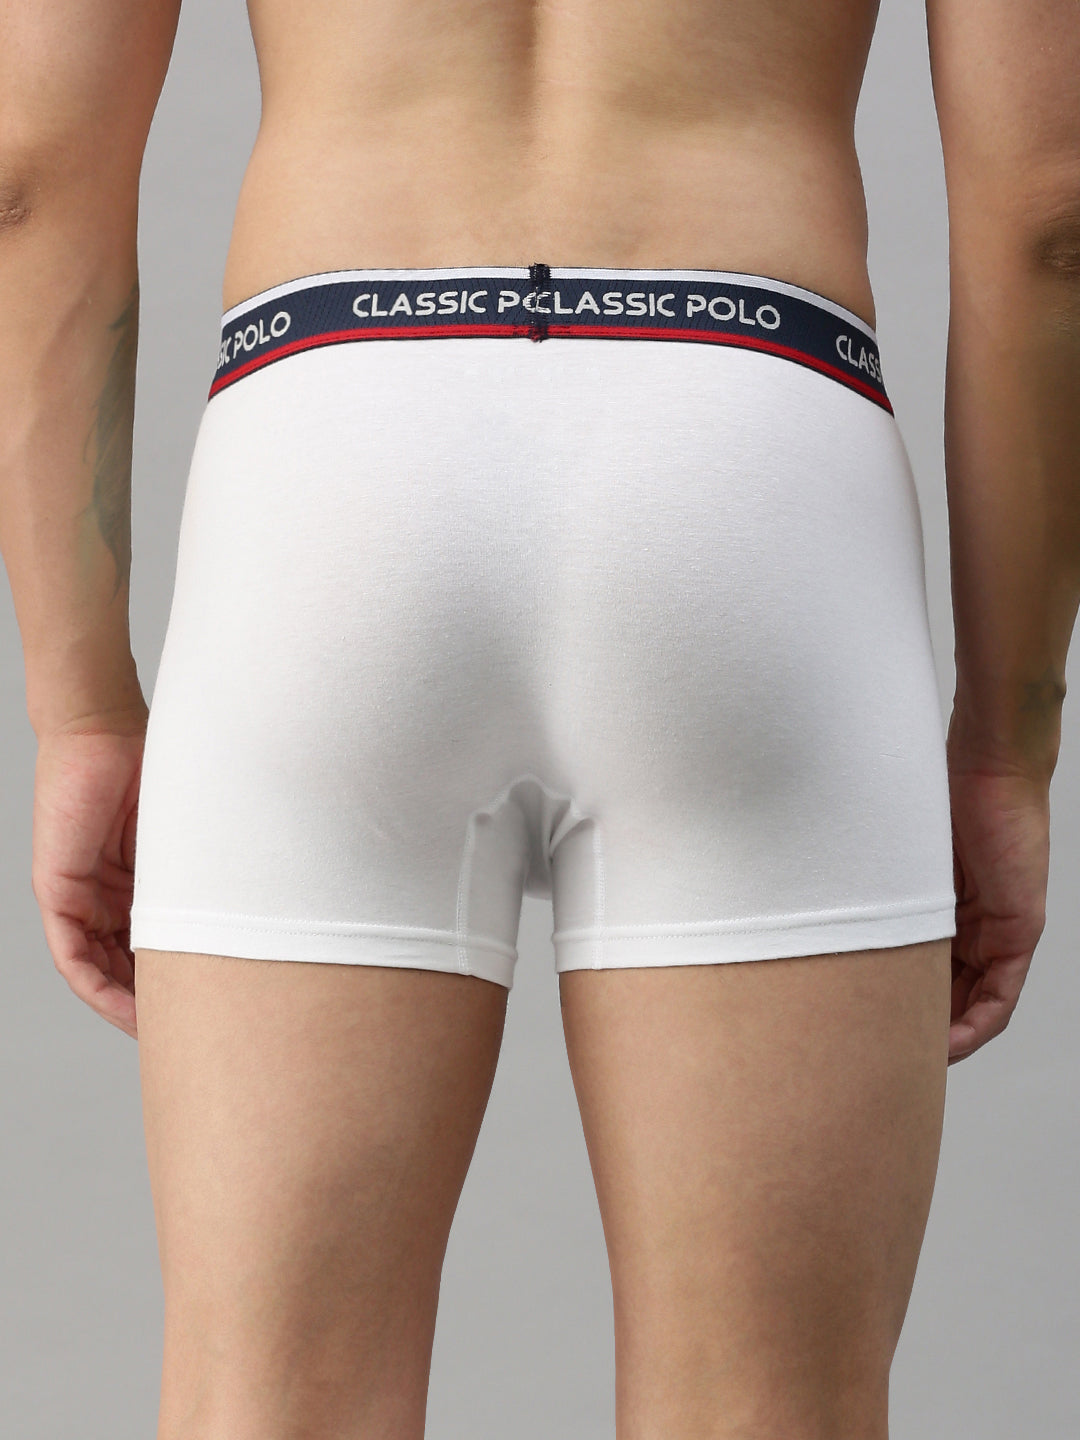 Classic Polo Men's Modal Solid Trunks | Glance - White (Pack of 2)